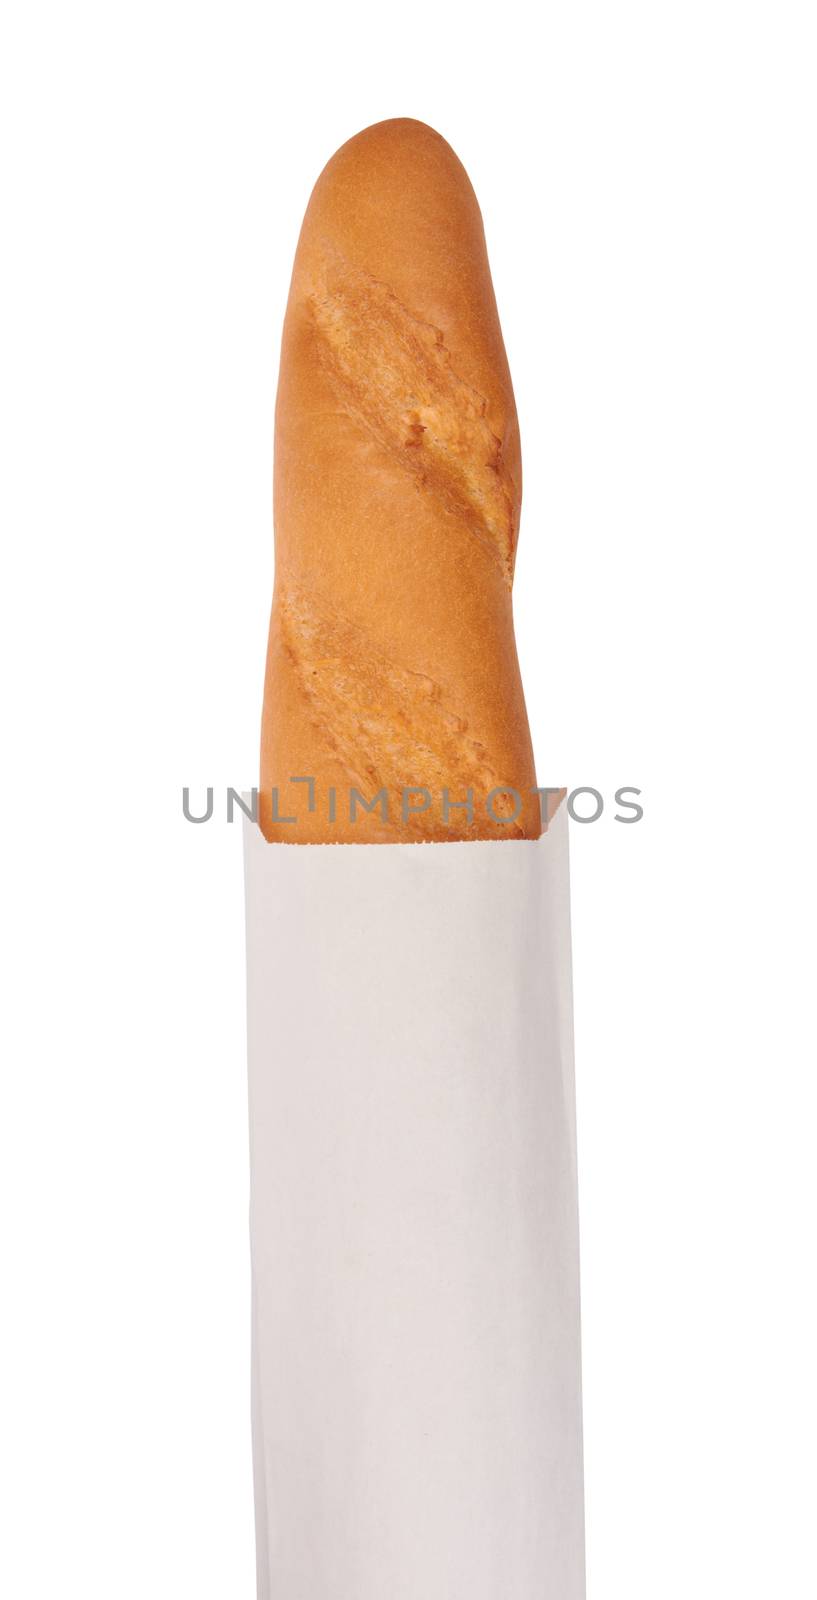 long loaf in paper bag, isolated on white background 